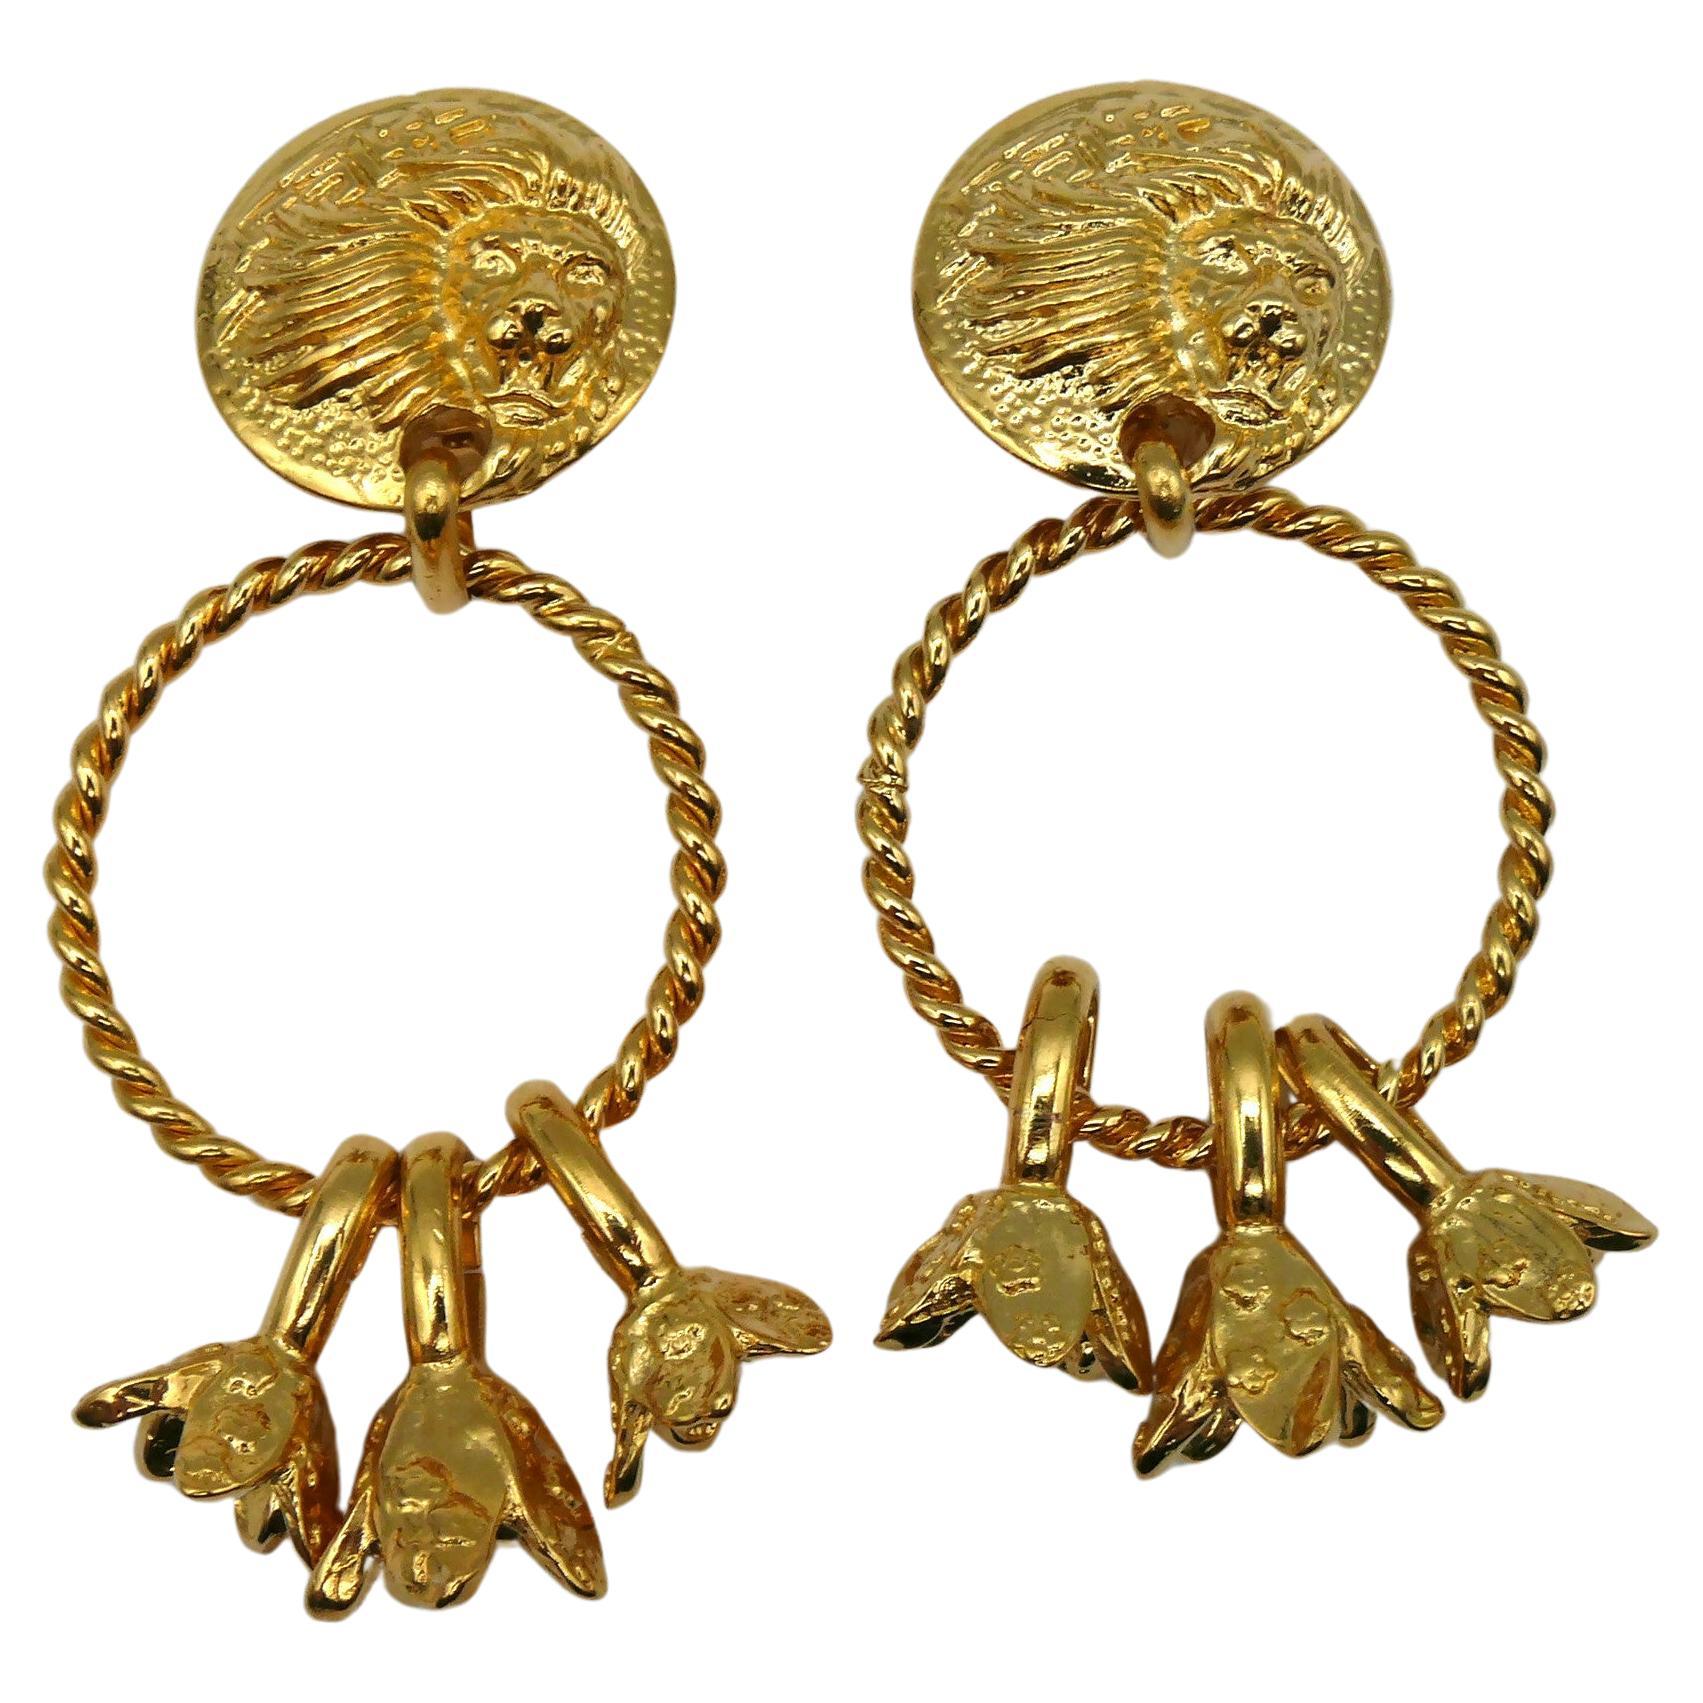 VERSUS by GIANNI VERSACE Vintage Gold Tone Lion Head Dangling Earrings For Sale